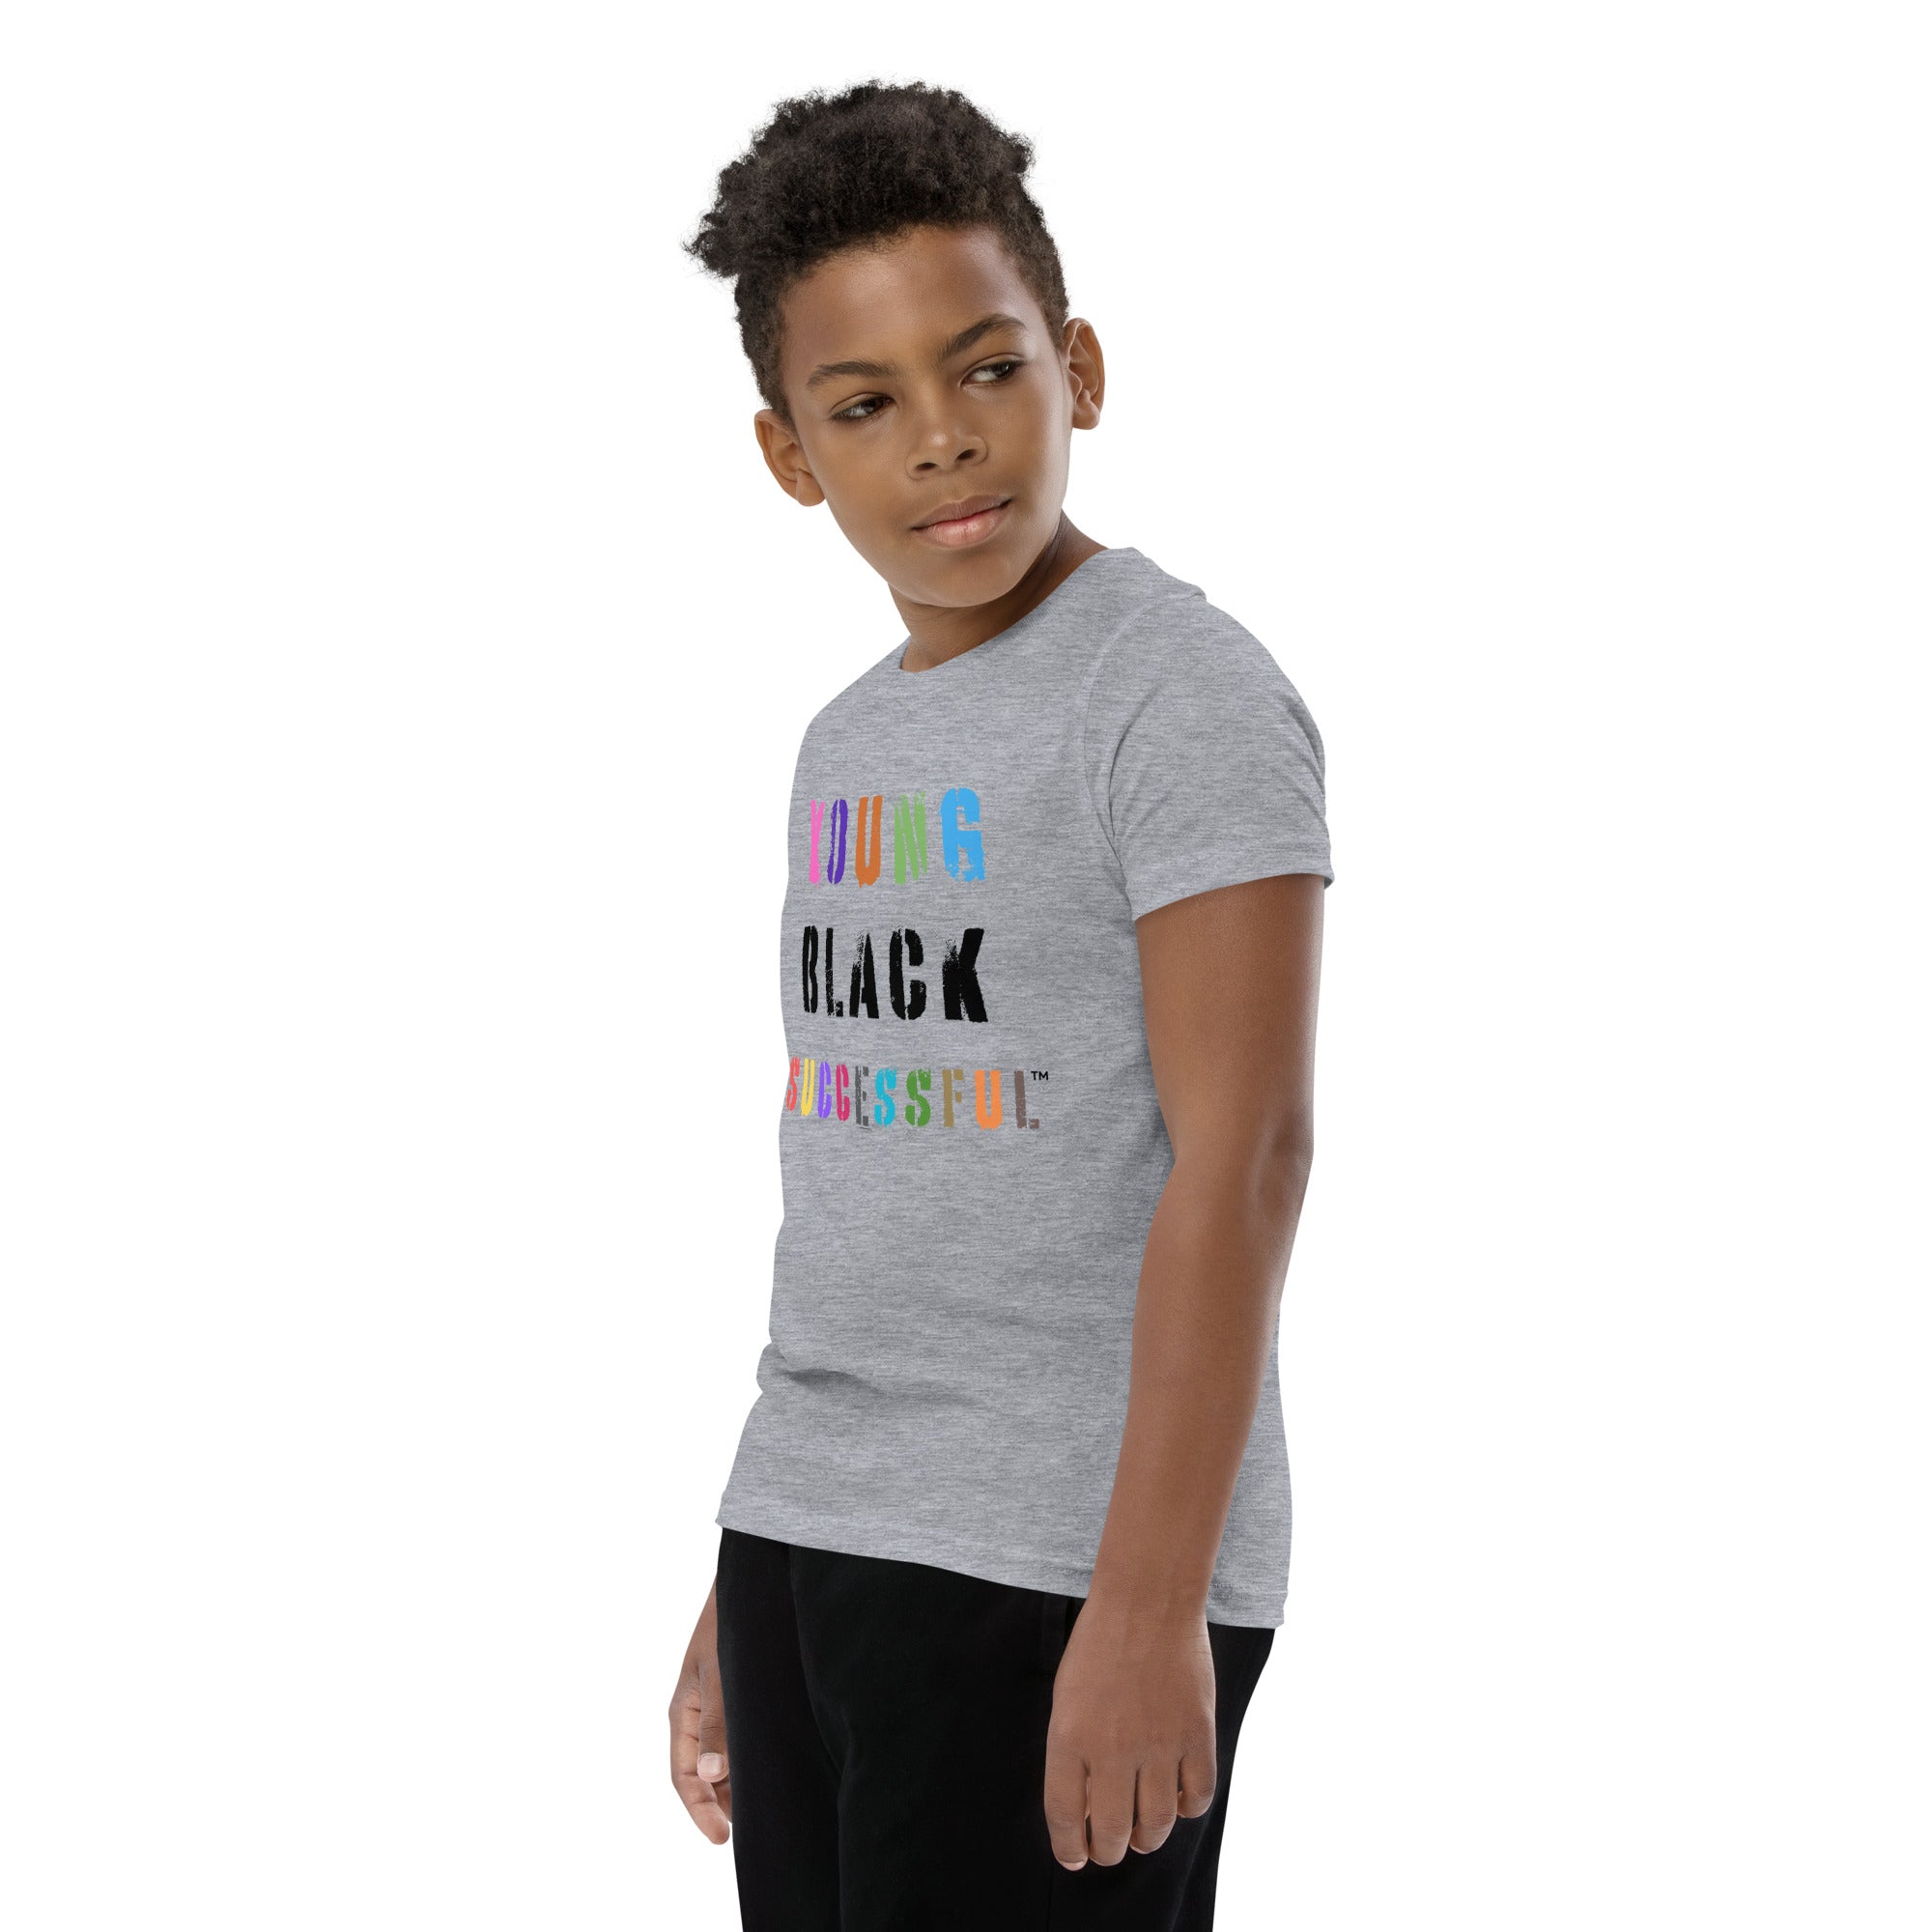 Young Black Successful TM Youth Short Sleeve T-Shirt